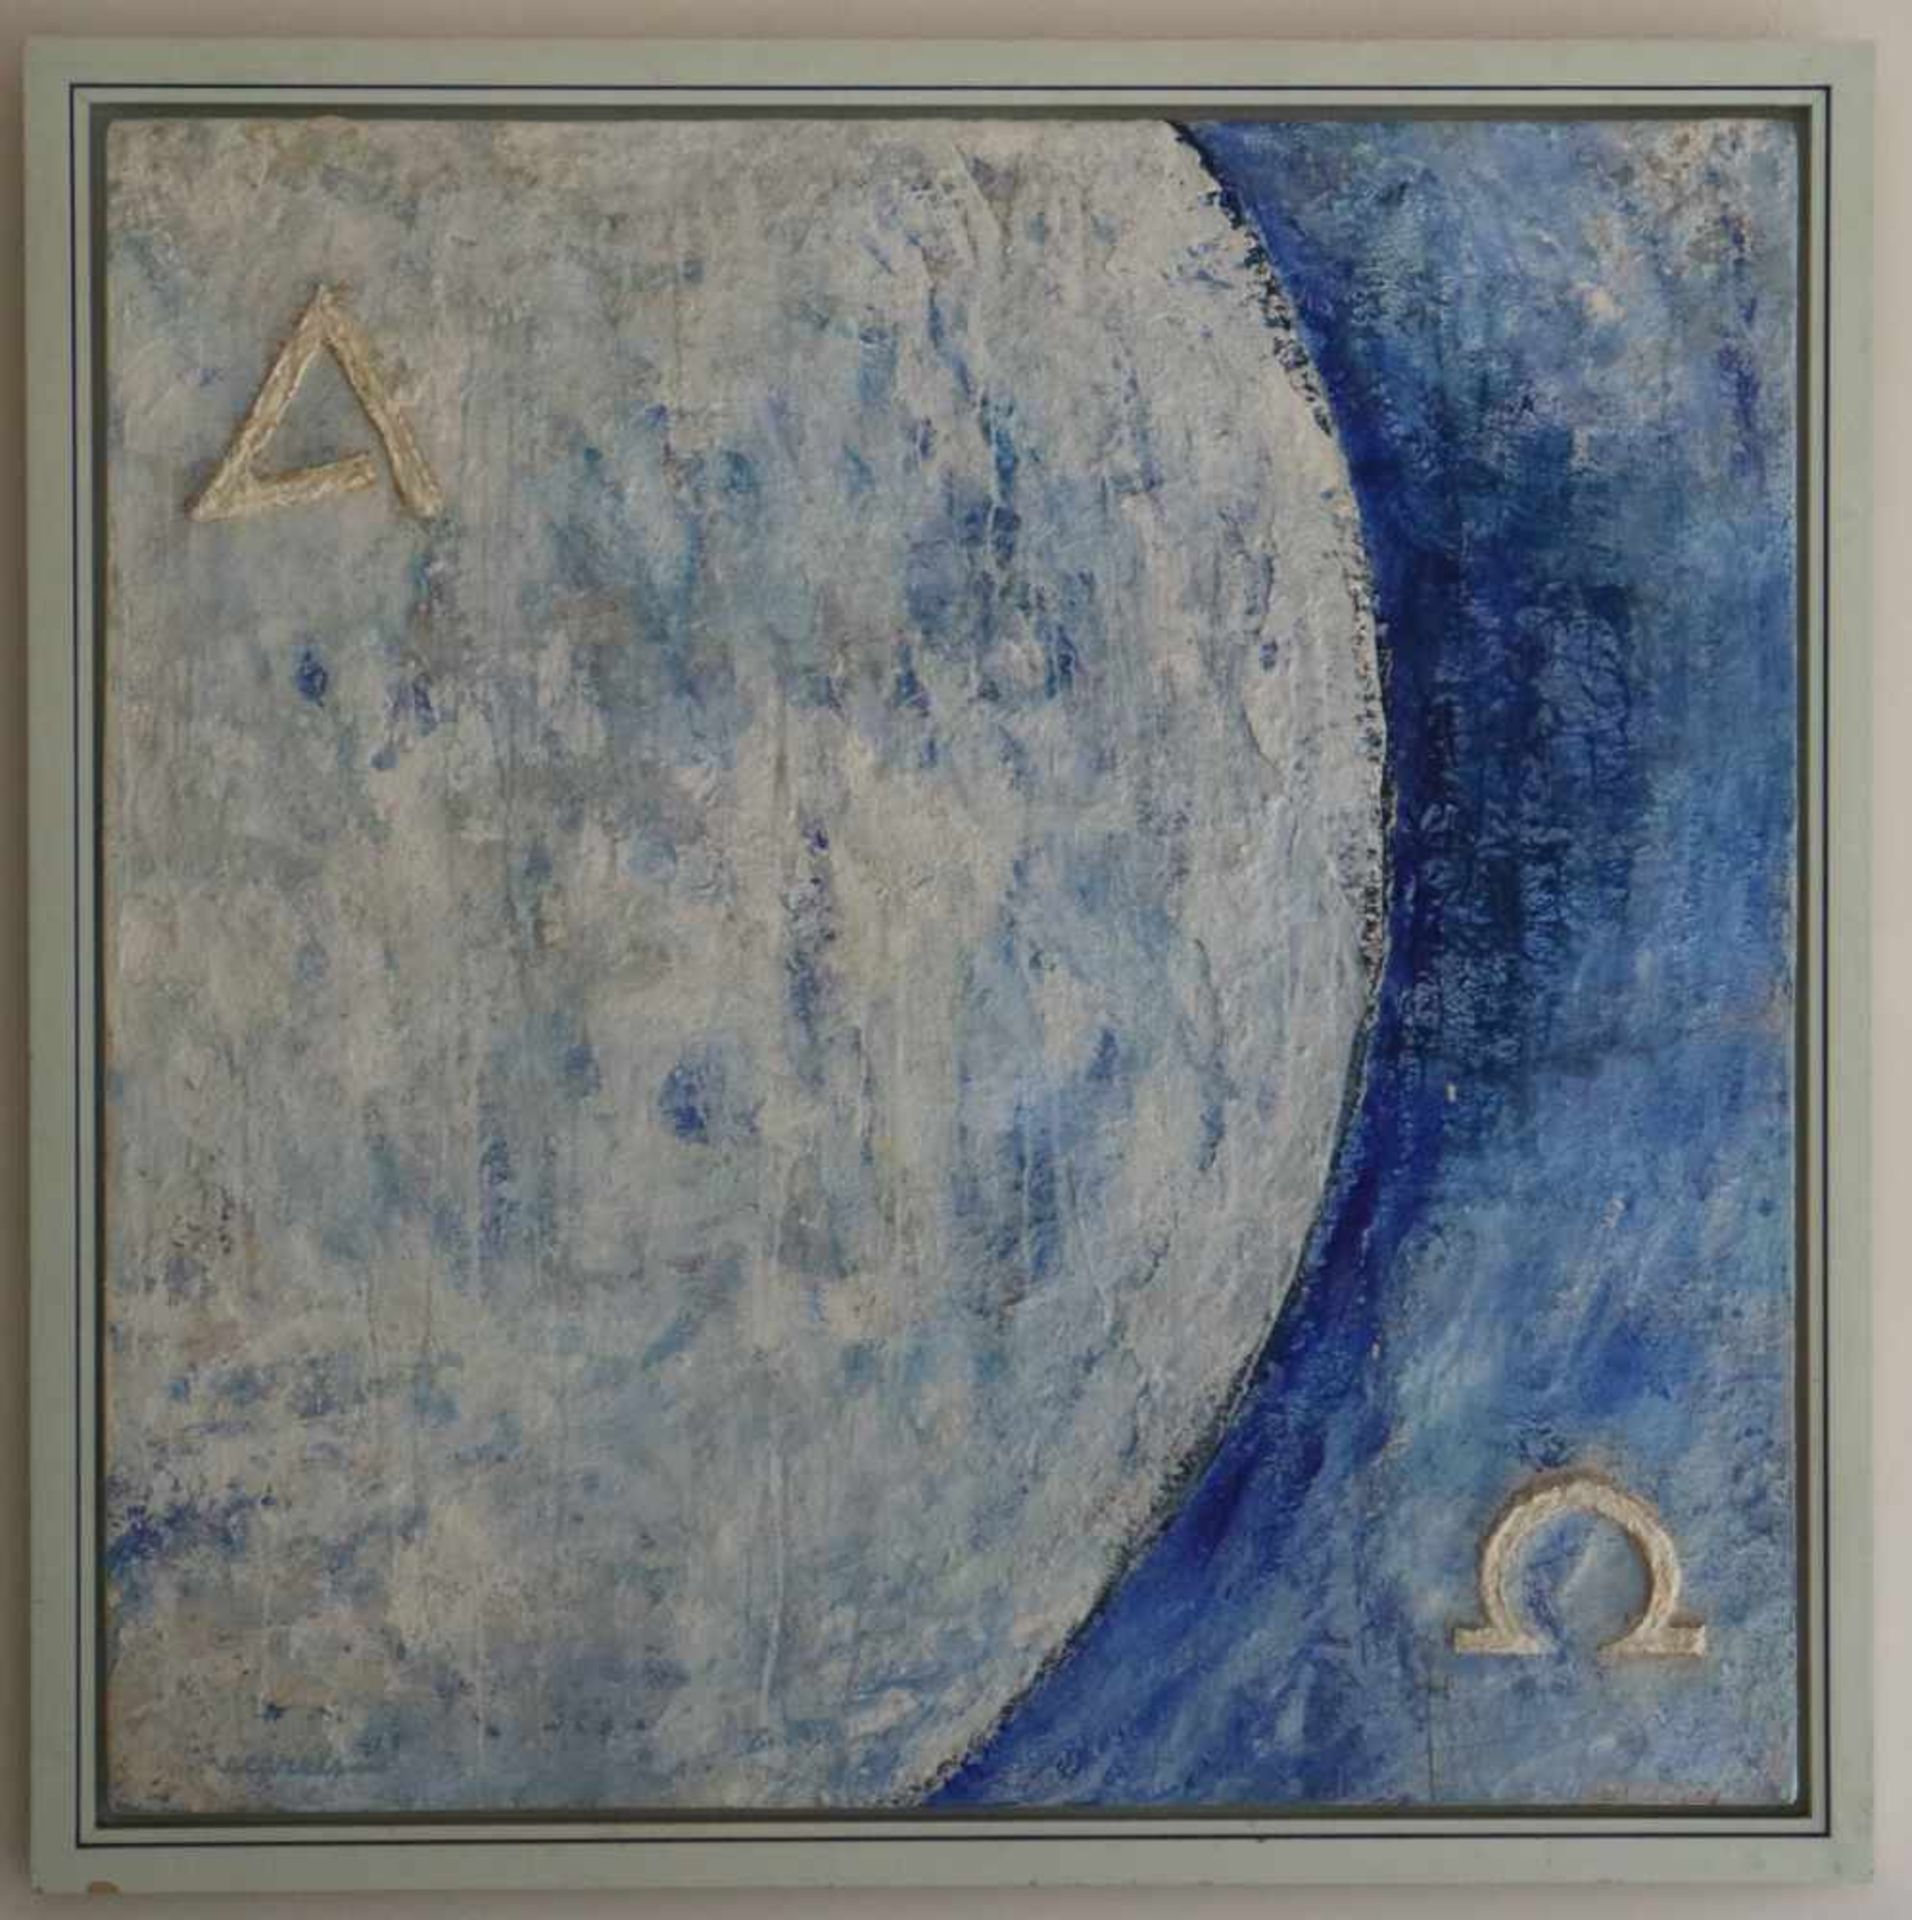 Eddy CarelsOil on canvas Alfa and Omega 1995 Signed and titled verso120 x 120 cm - Bild 2 aus 3